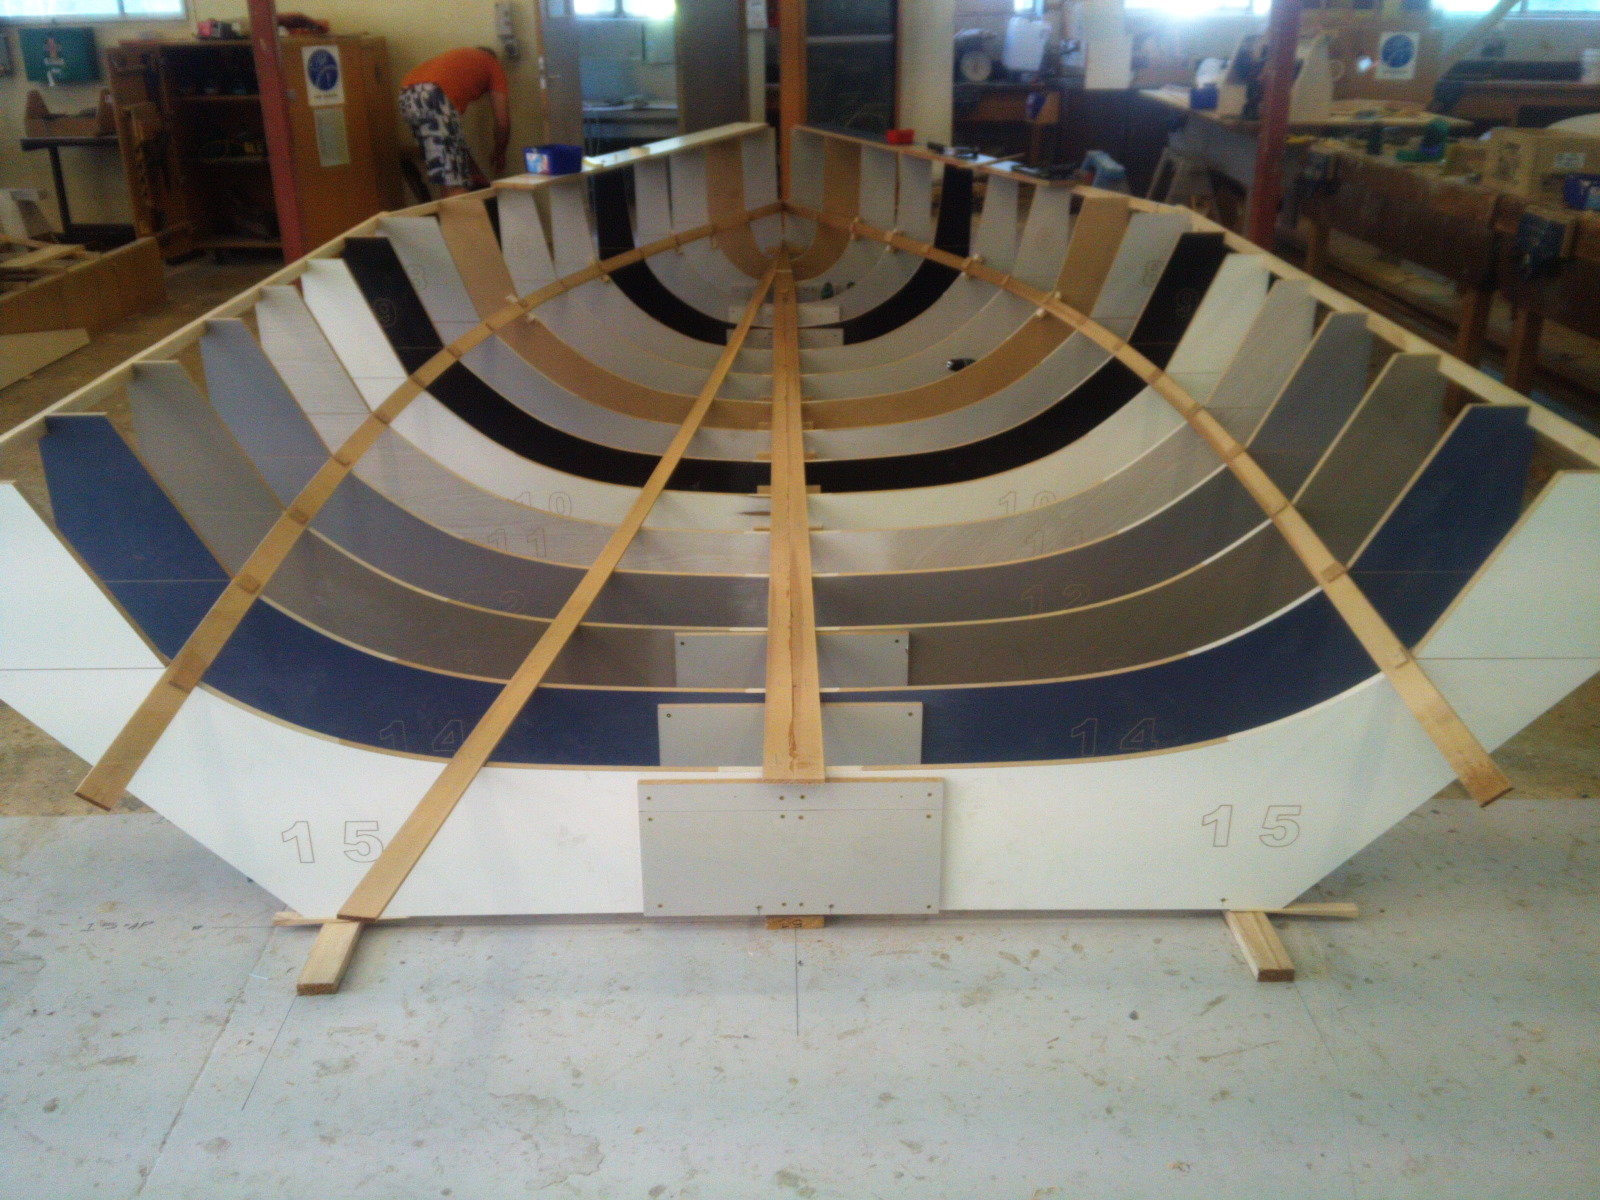 BenJames: Strip Planking and Hull construction